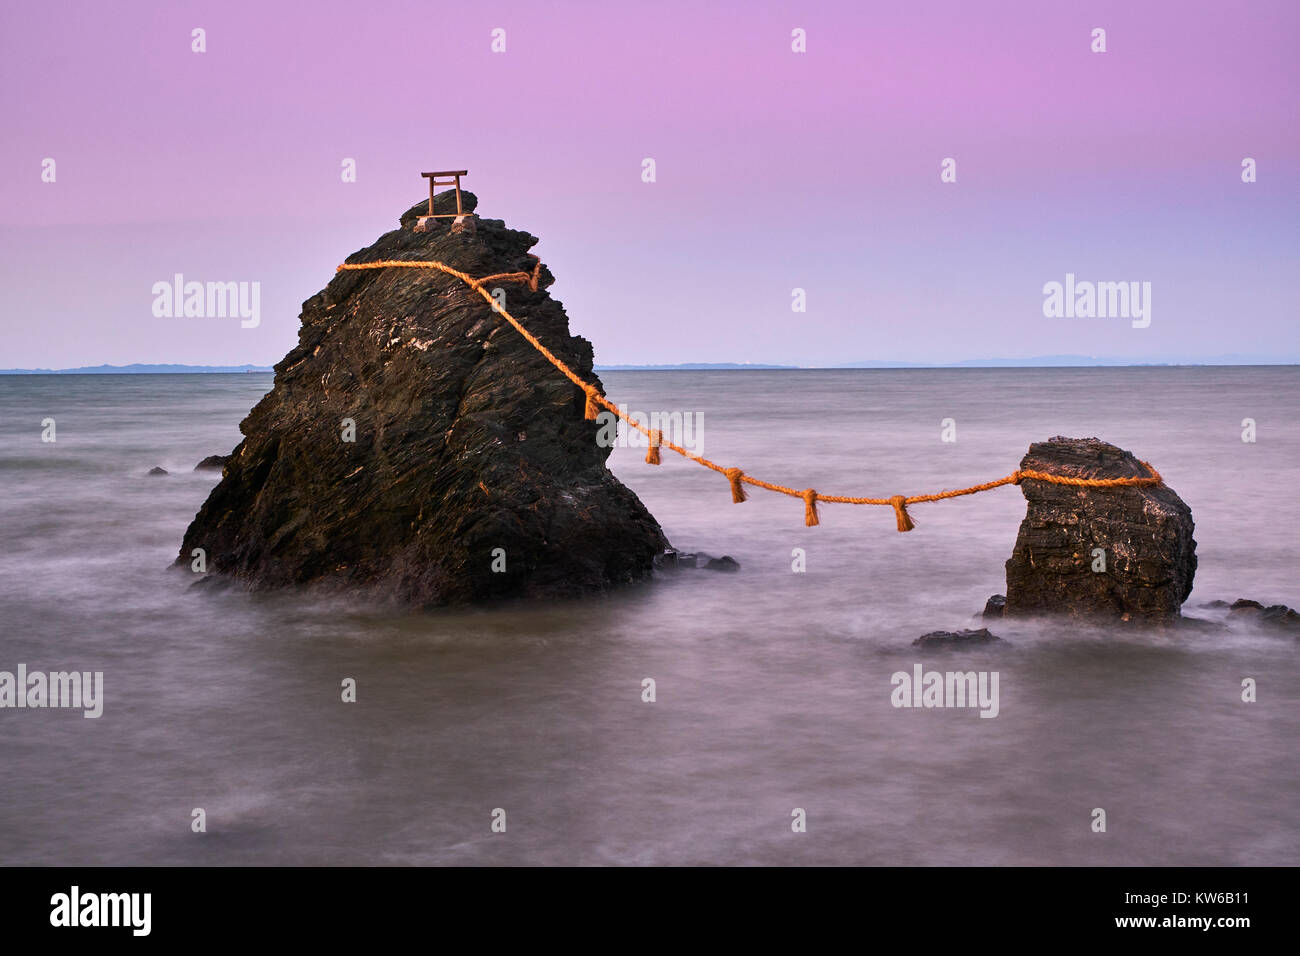 Japan, Honshu island, Ise Shima, Mie region, Futami, Meoto-Iwa (Wedded Rocks), two rocks considered to be male and female, joined in matrimony by shim Stock Photo